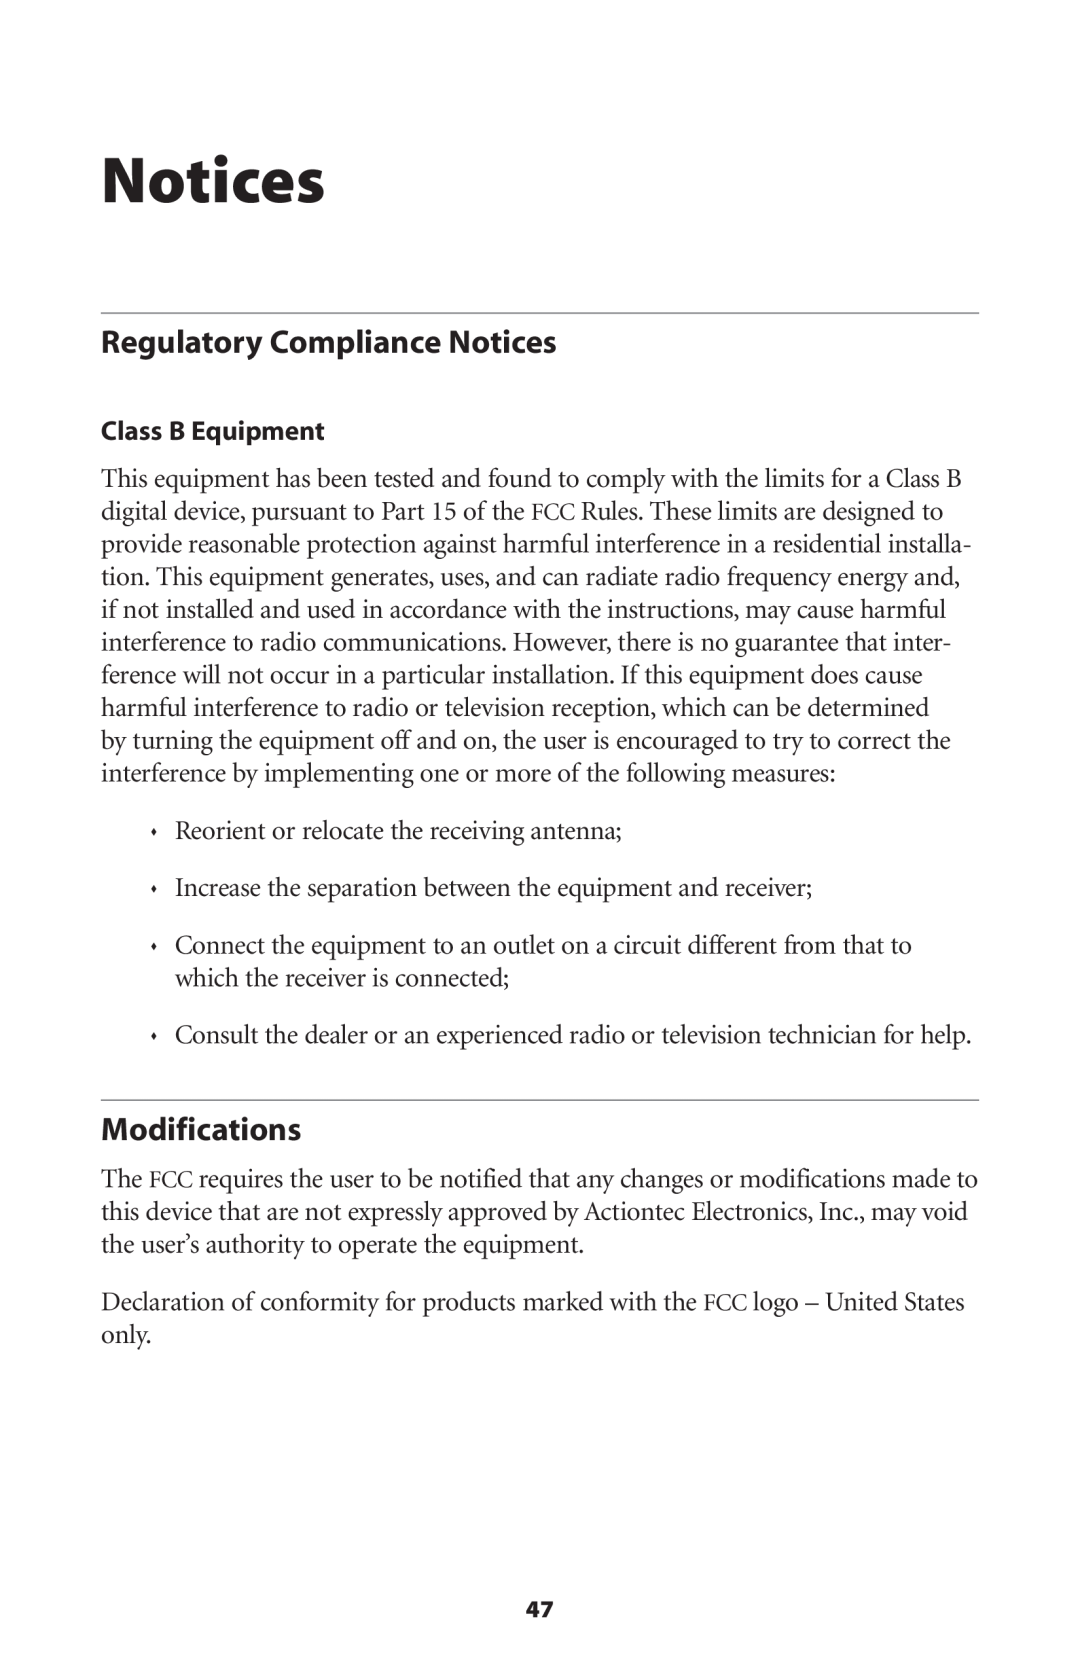 Actiontec electronic HPE400T user manual Regulatory Compliance Notices, Modifications 